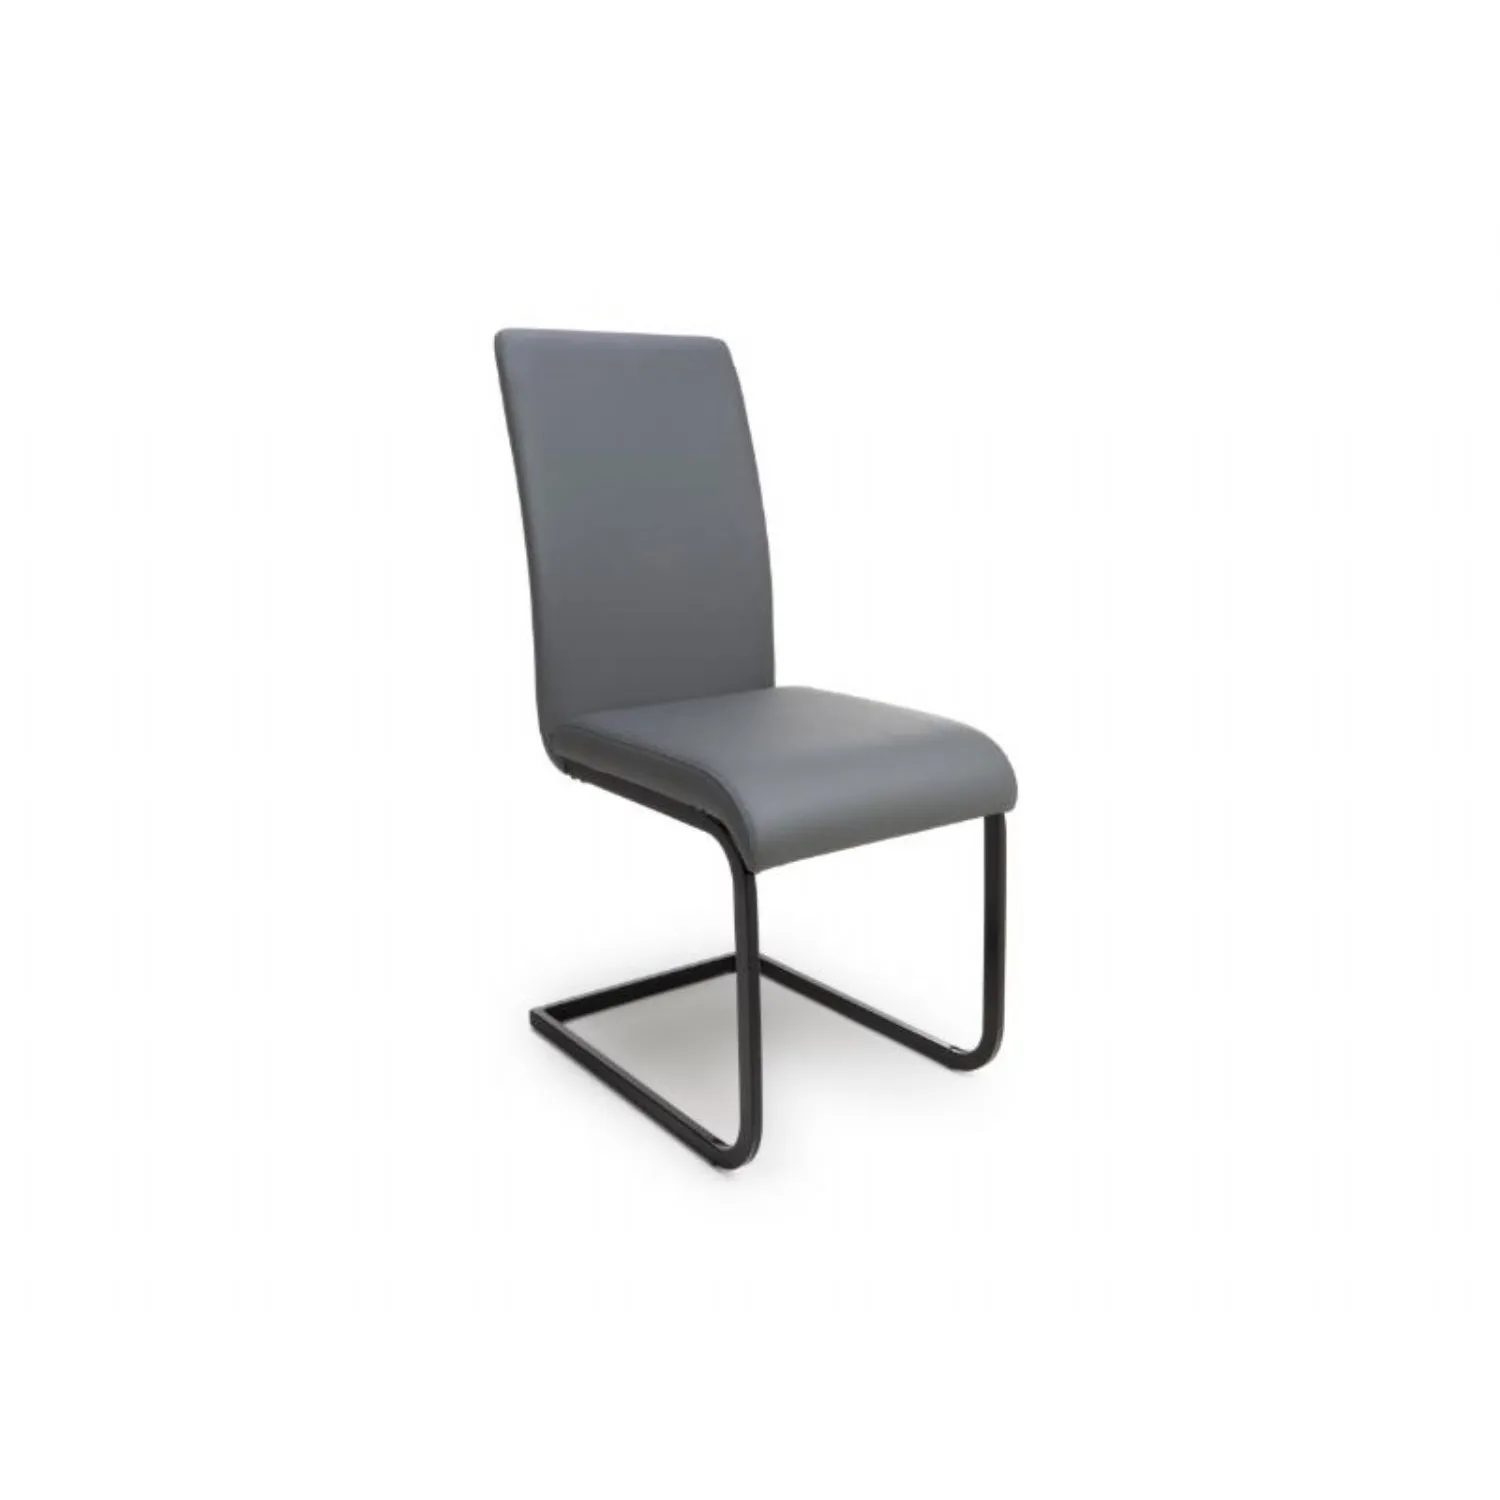 Grey Leather Dining Chair Black Metal Cantilever Legs